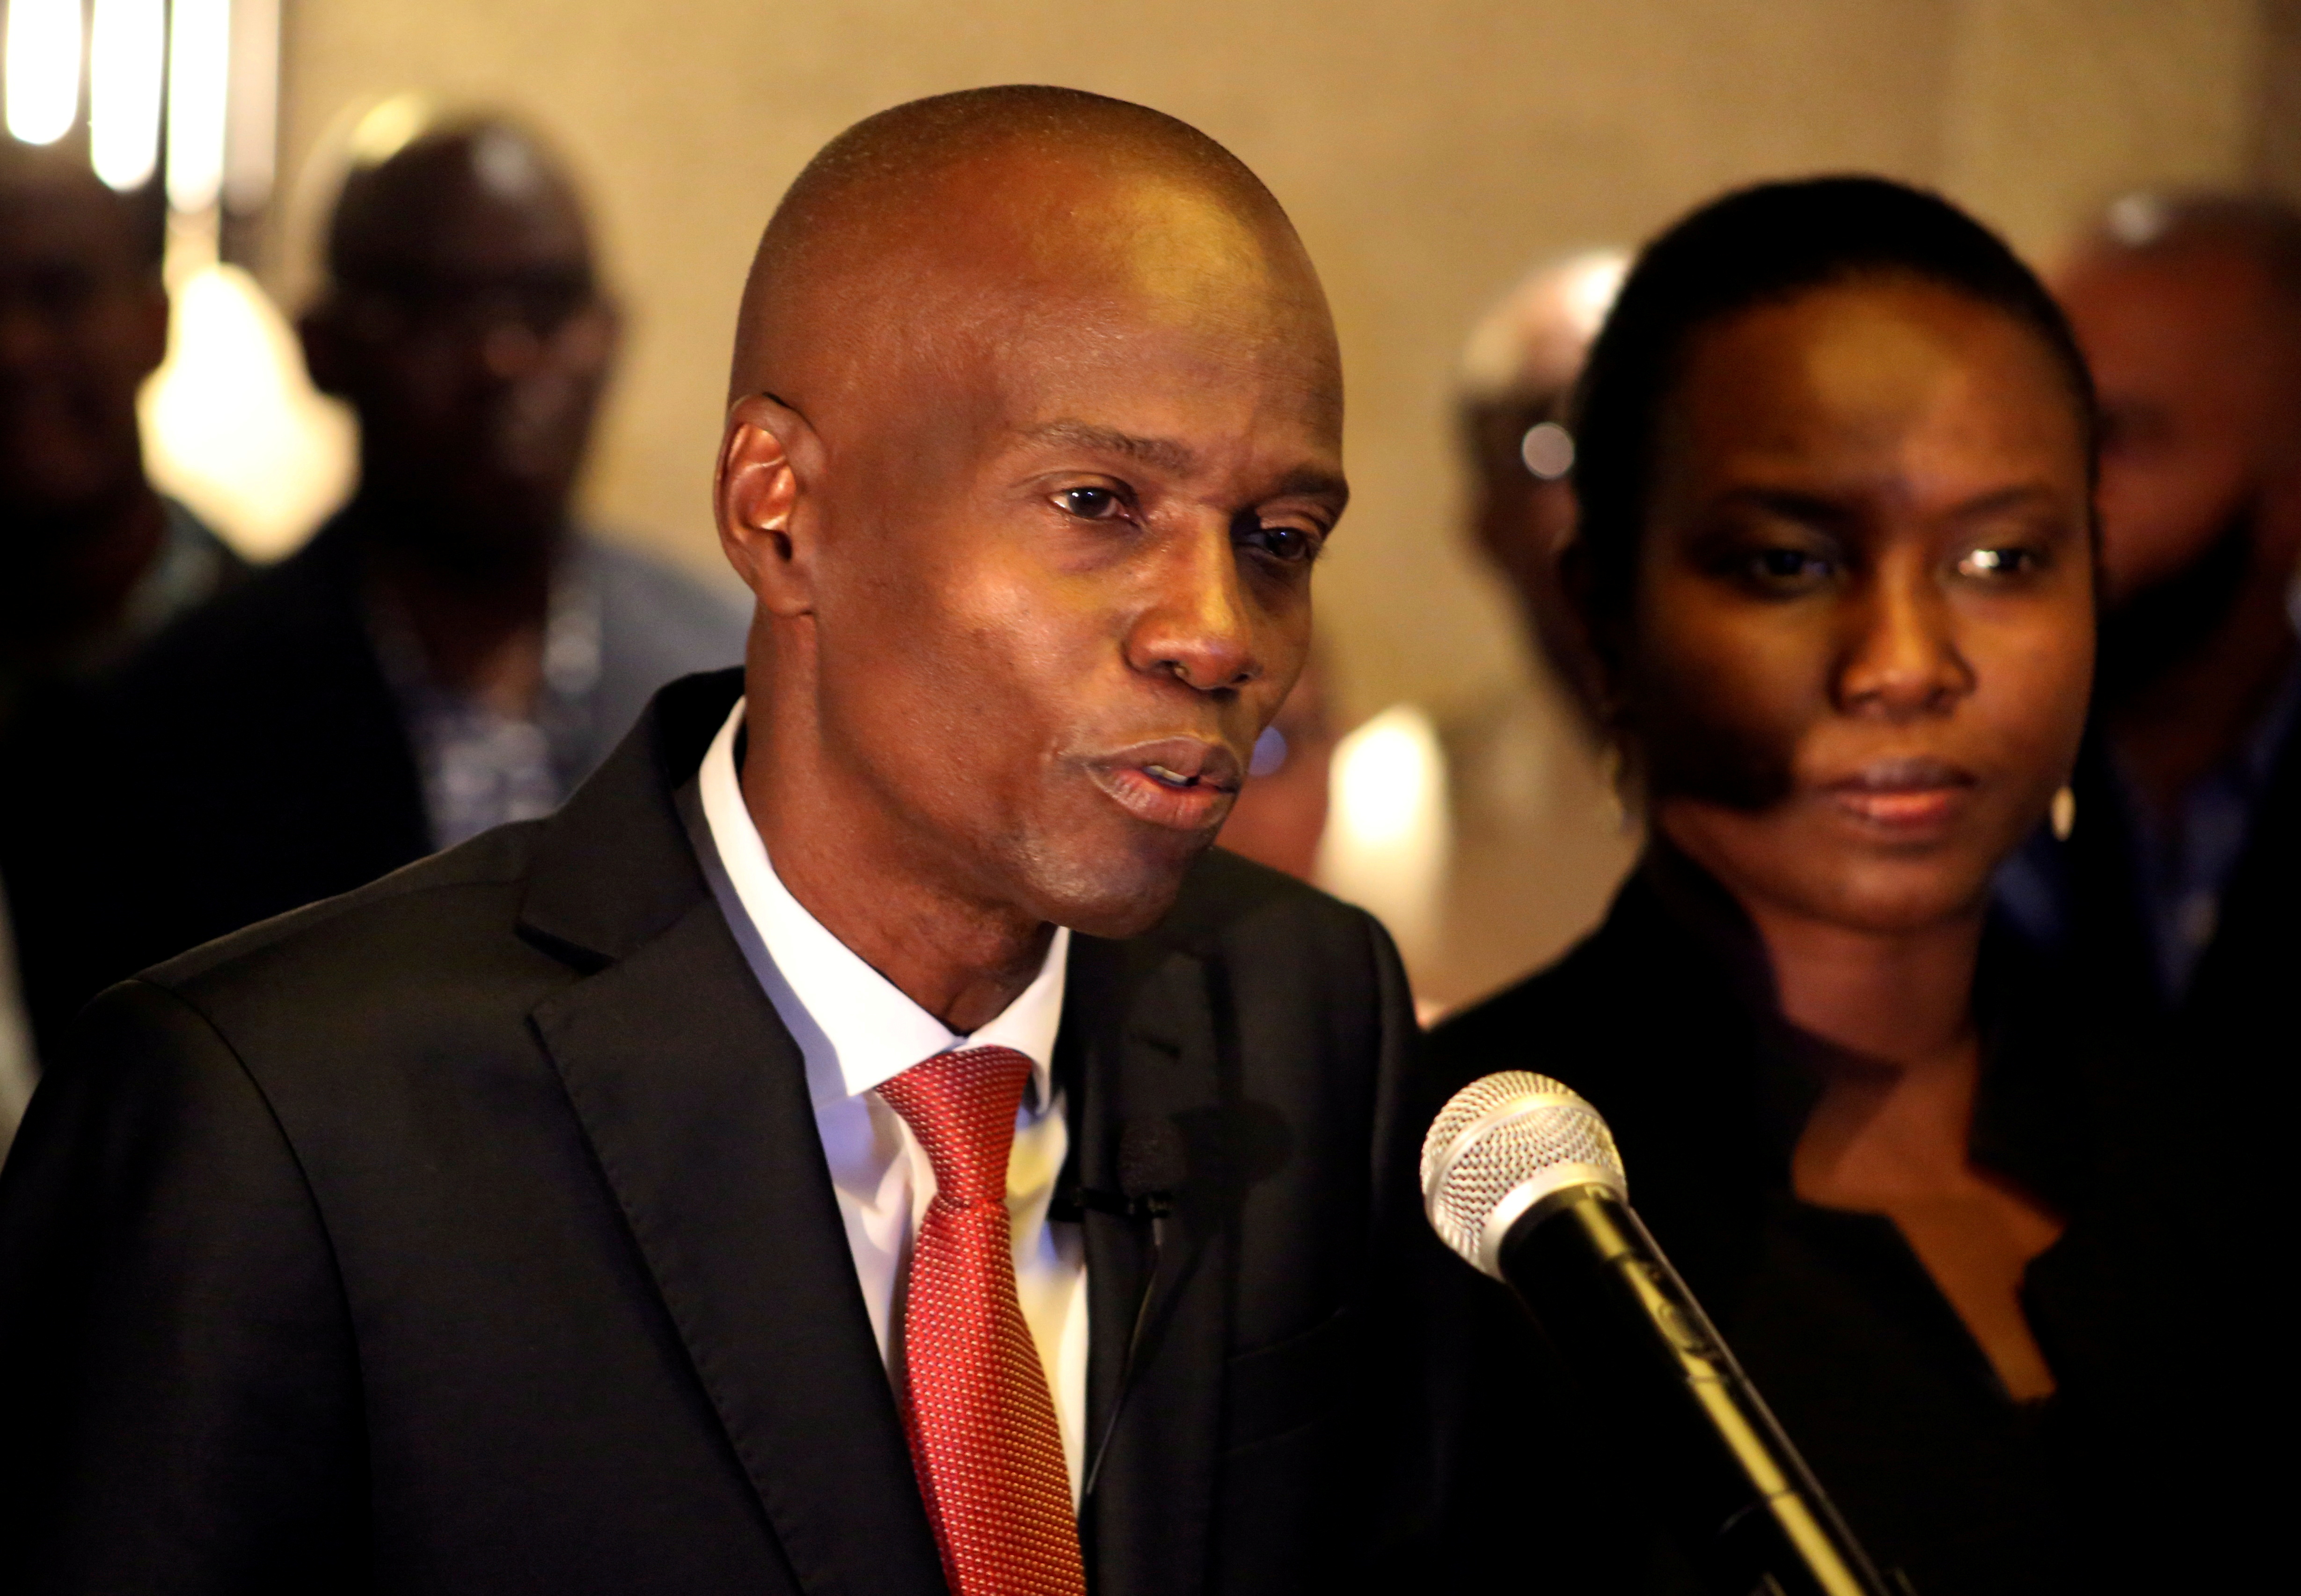 Jovenel Moise addresses the media next to his wife Martine after winning Haiti's 2016 presidential election